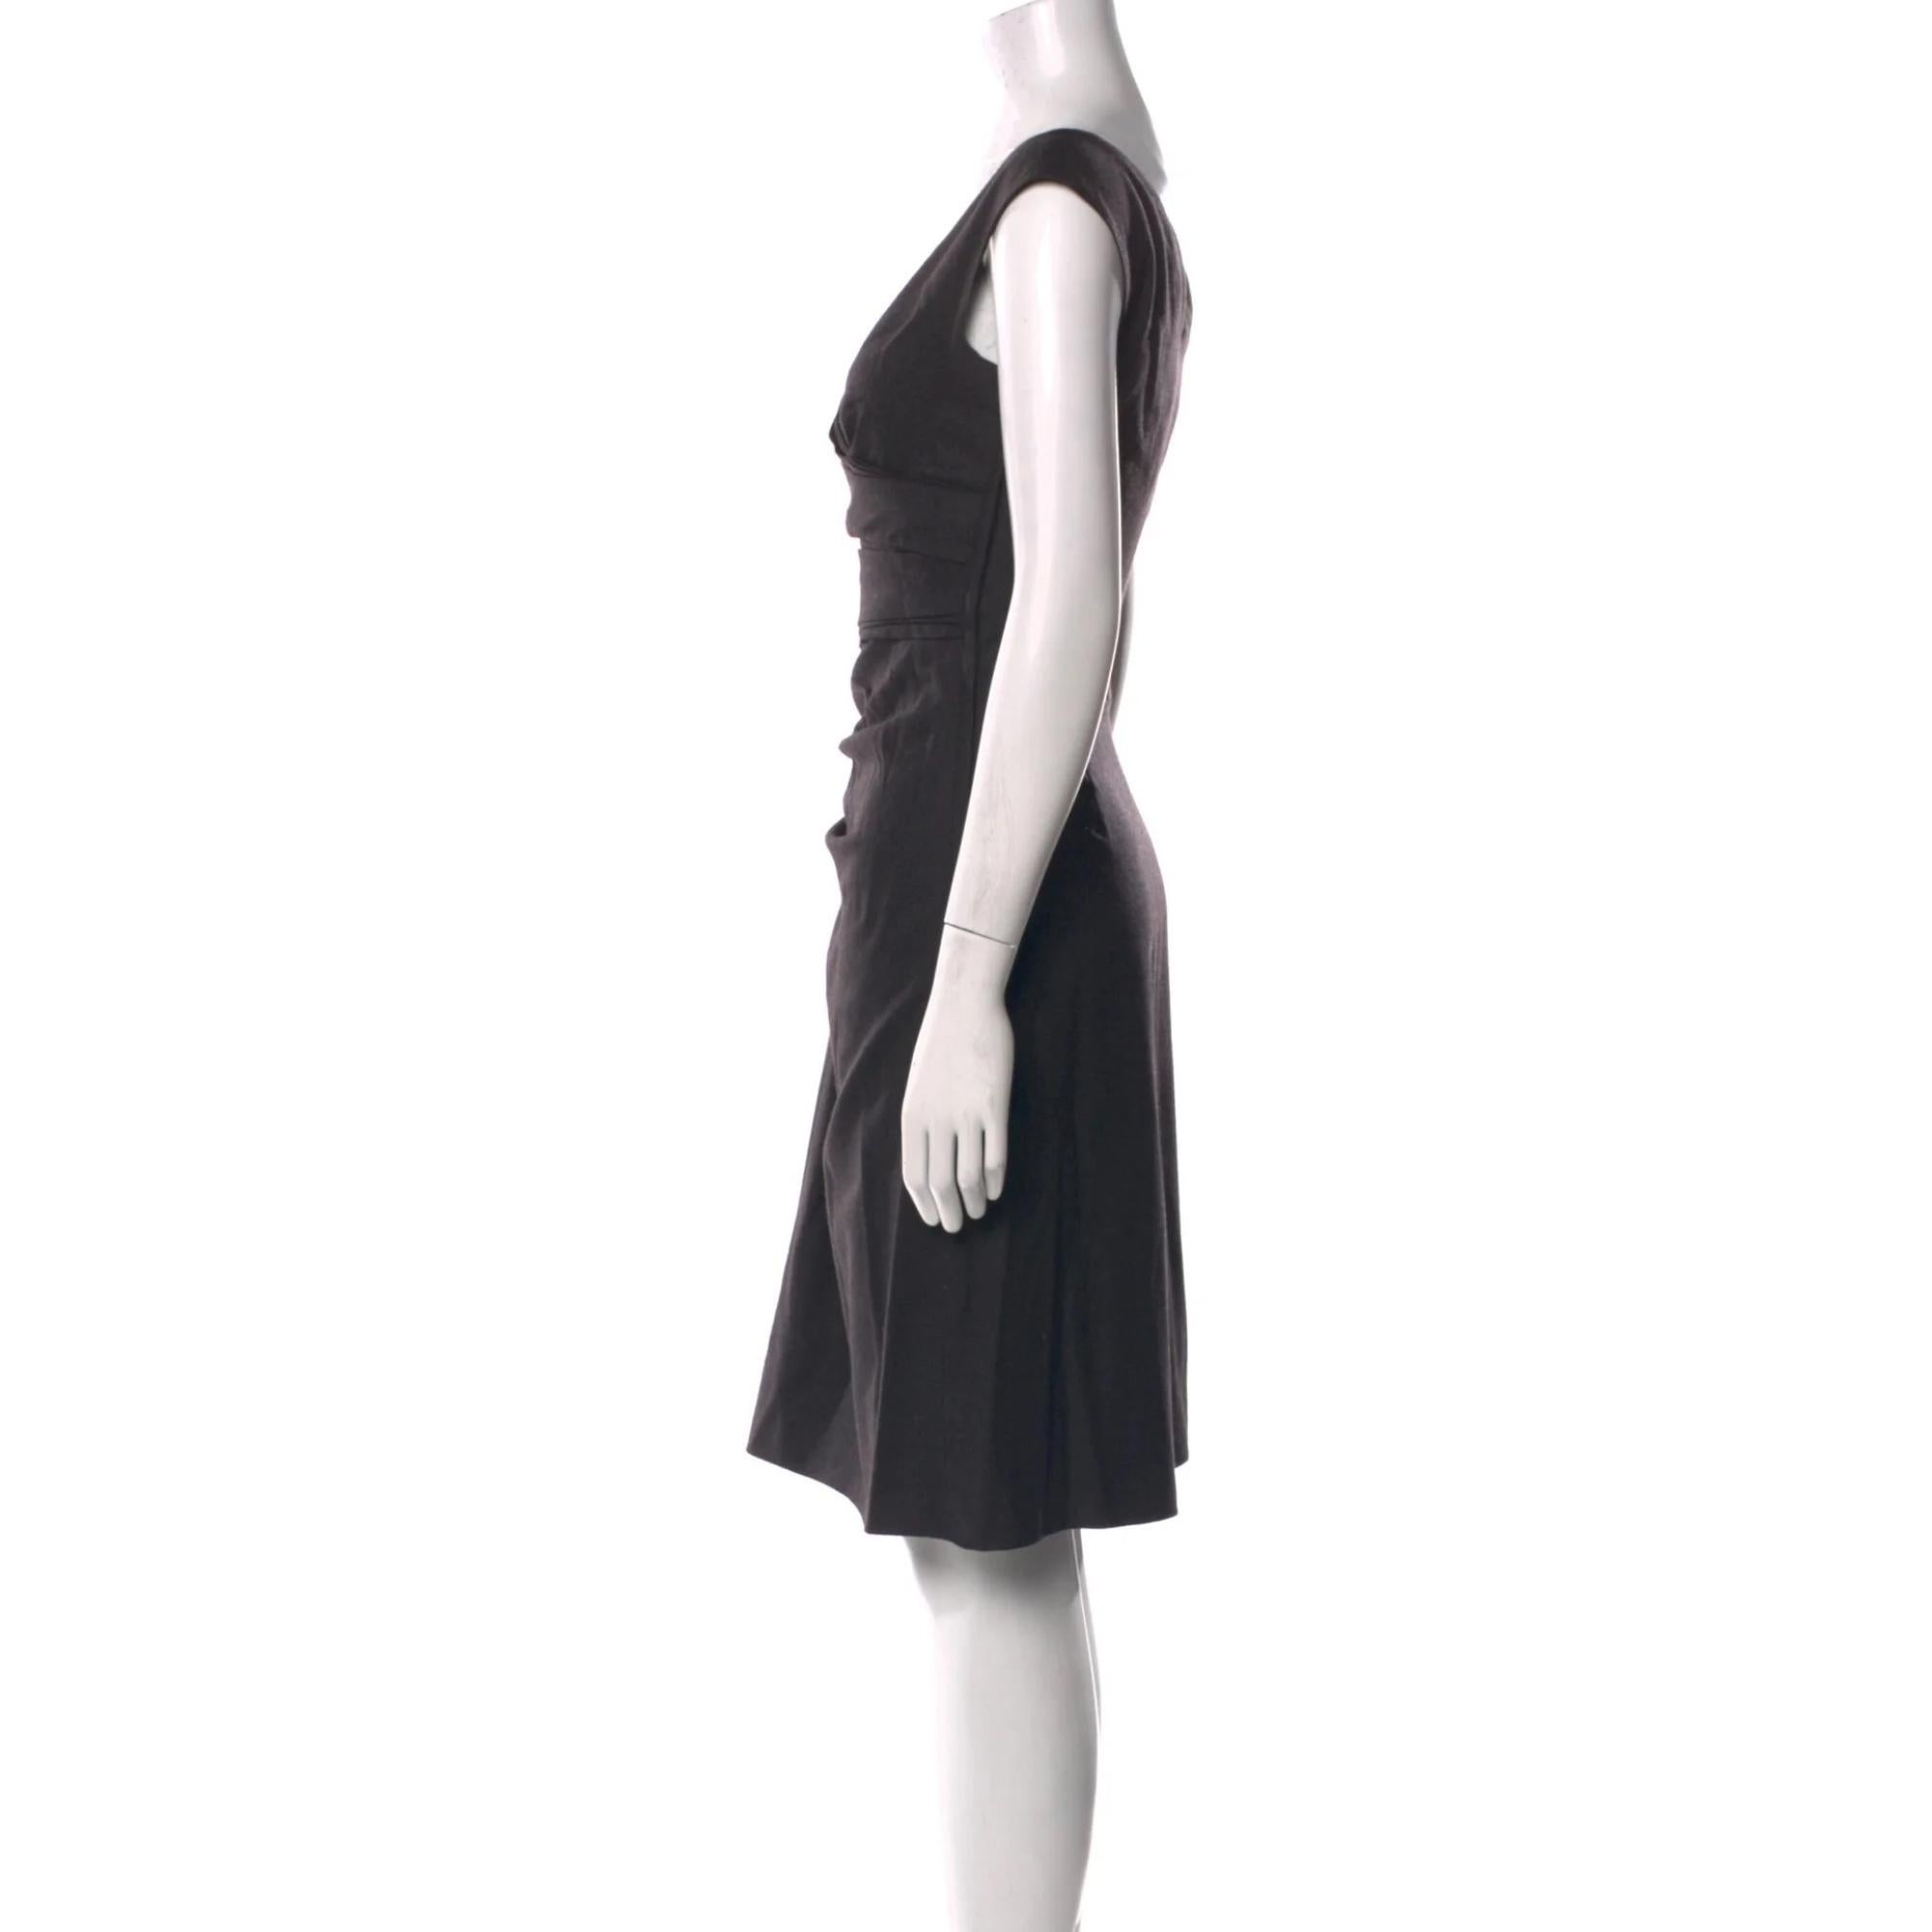 Valentino Virgin Wool Dress. Grey. Sleeveless with V-Neck Concealed Zip Closure at Side. Designer Fit: Dresses by Valentino typically fit true to size.

Color: Black
Material: 100% Virgin Wool; Lining 100% Silk
Condition: Excellent
Size: S  US